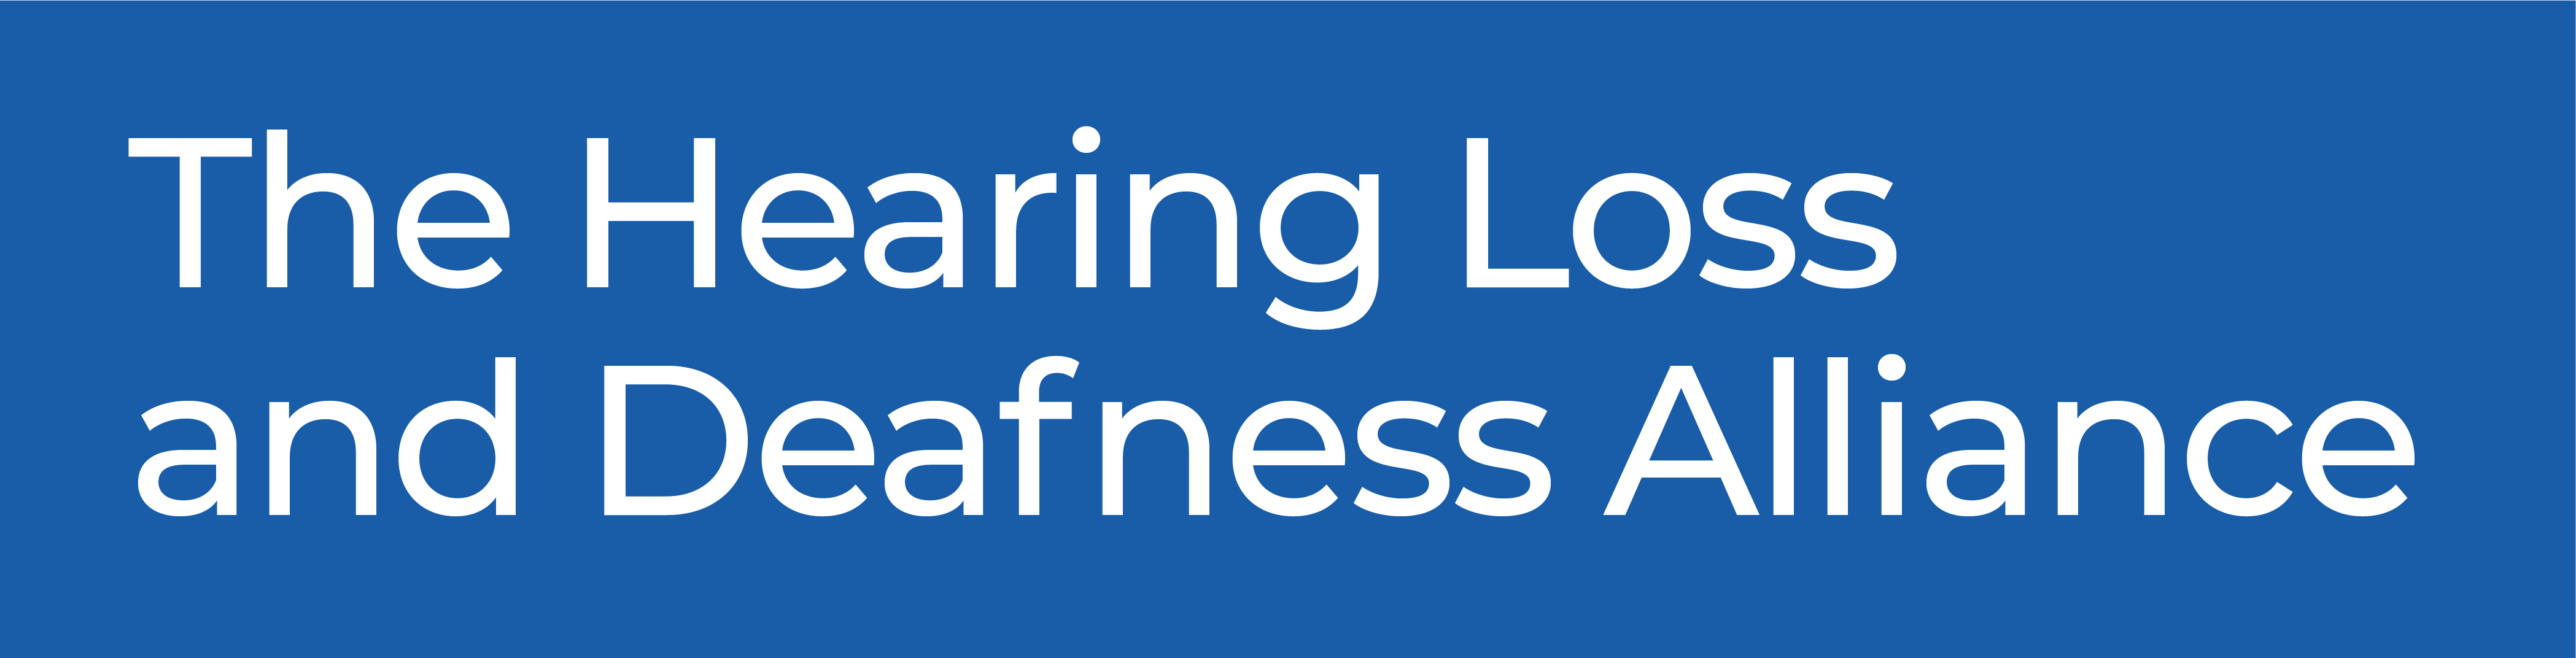 Hearing Loss and Deafness Alliance